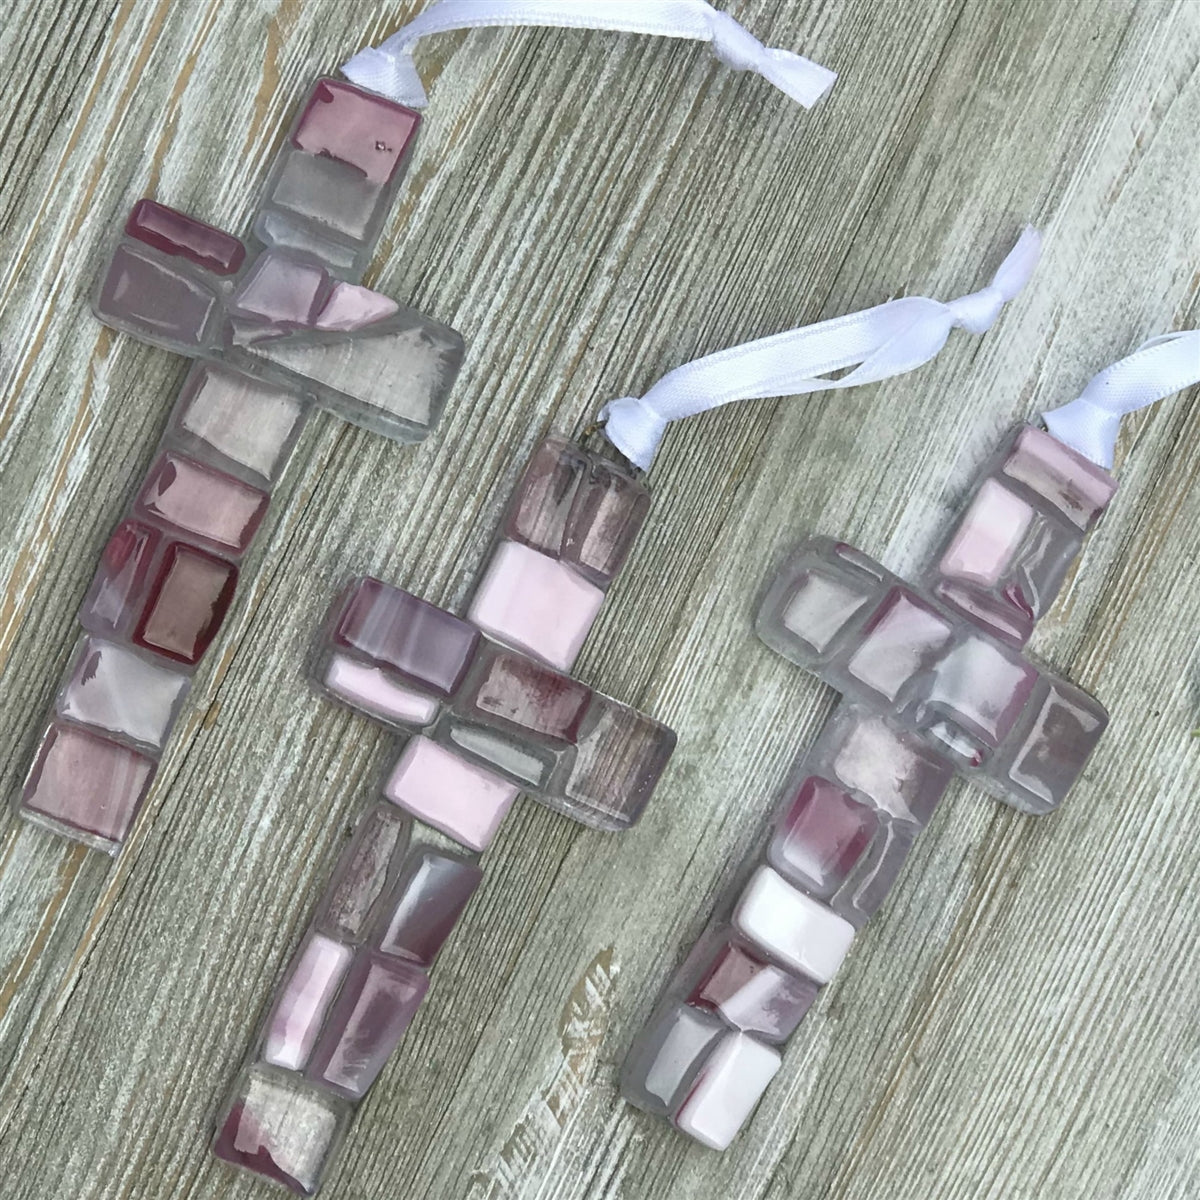 An assortment of pink mosaic crosses with varying shades of pink, white, and clear glass.